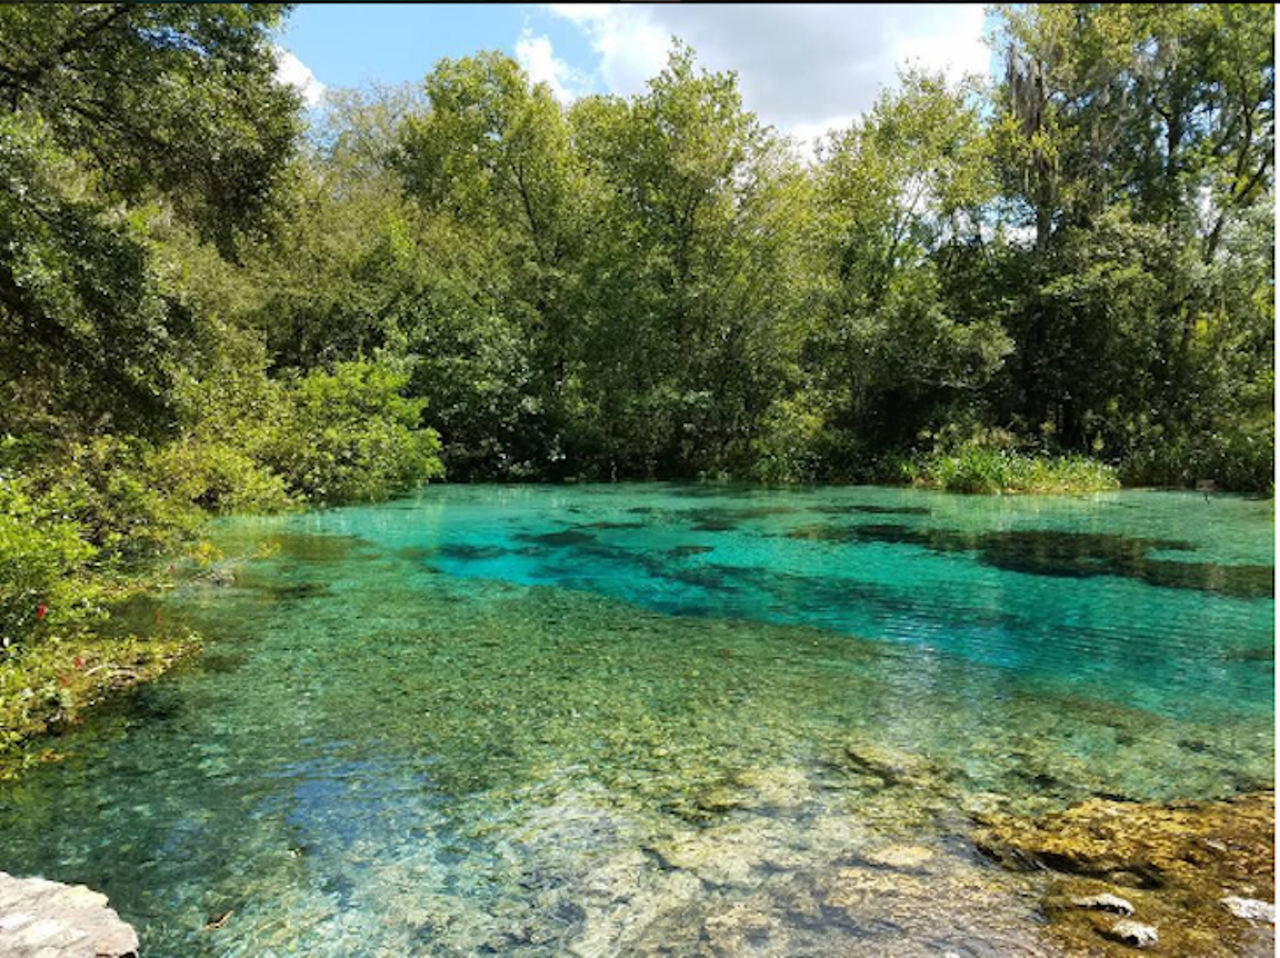 Ichetucknee Springs State Park
12087 SW U.S.Highway 27, Fort Whiteabout two and a half hours away
Photo via jm_so_willing/Instagram